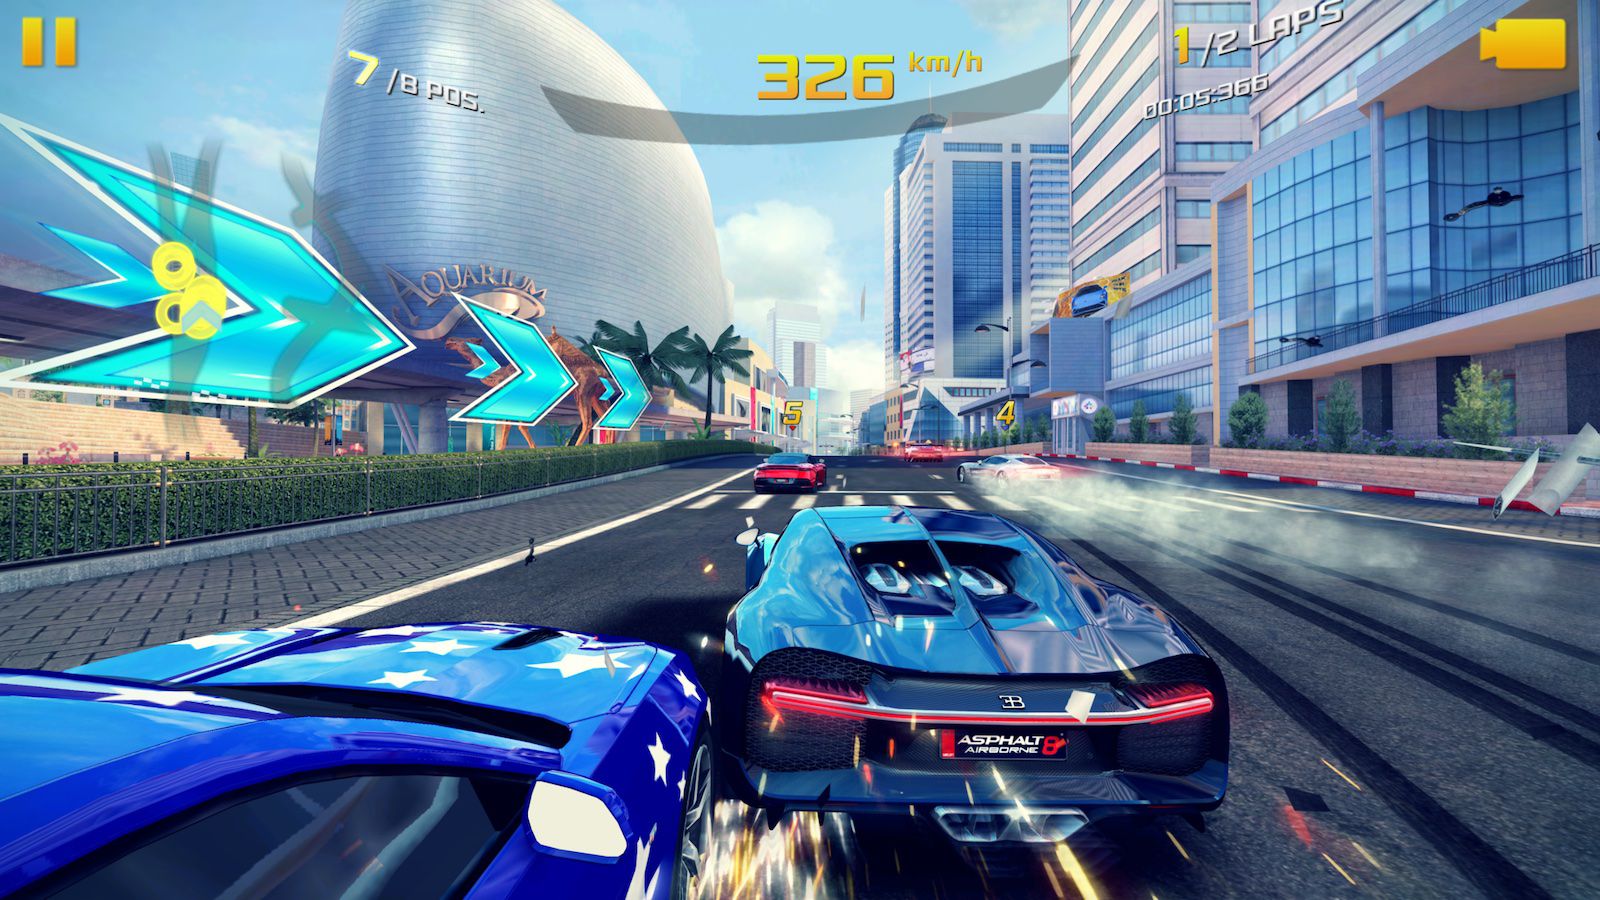 Two New Games Coming To Apple Arcade Including Gameloft S Racing Classic Asphalt 8 Airborne Macrumors